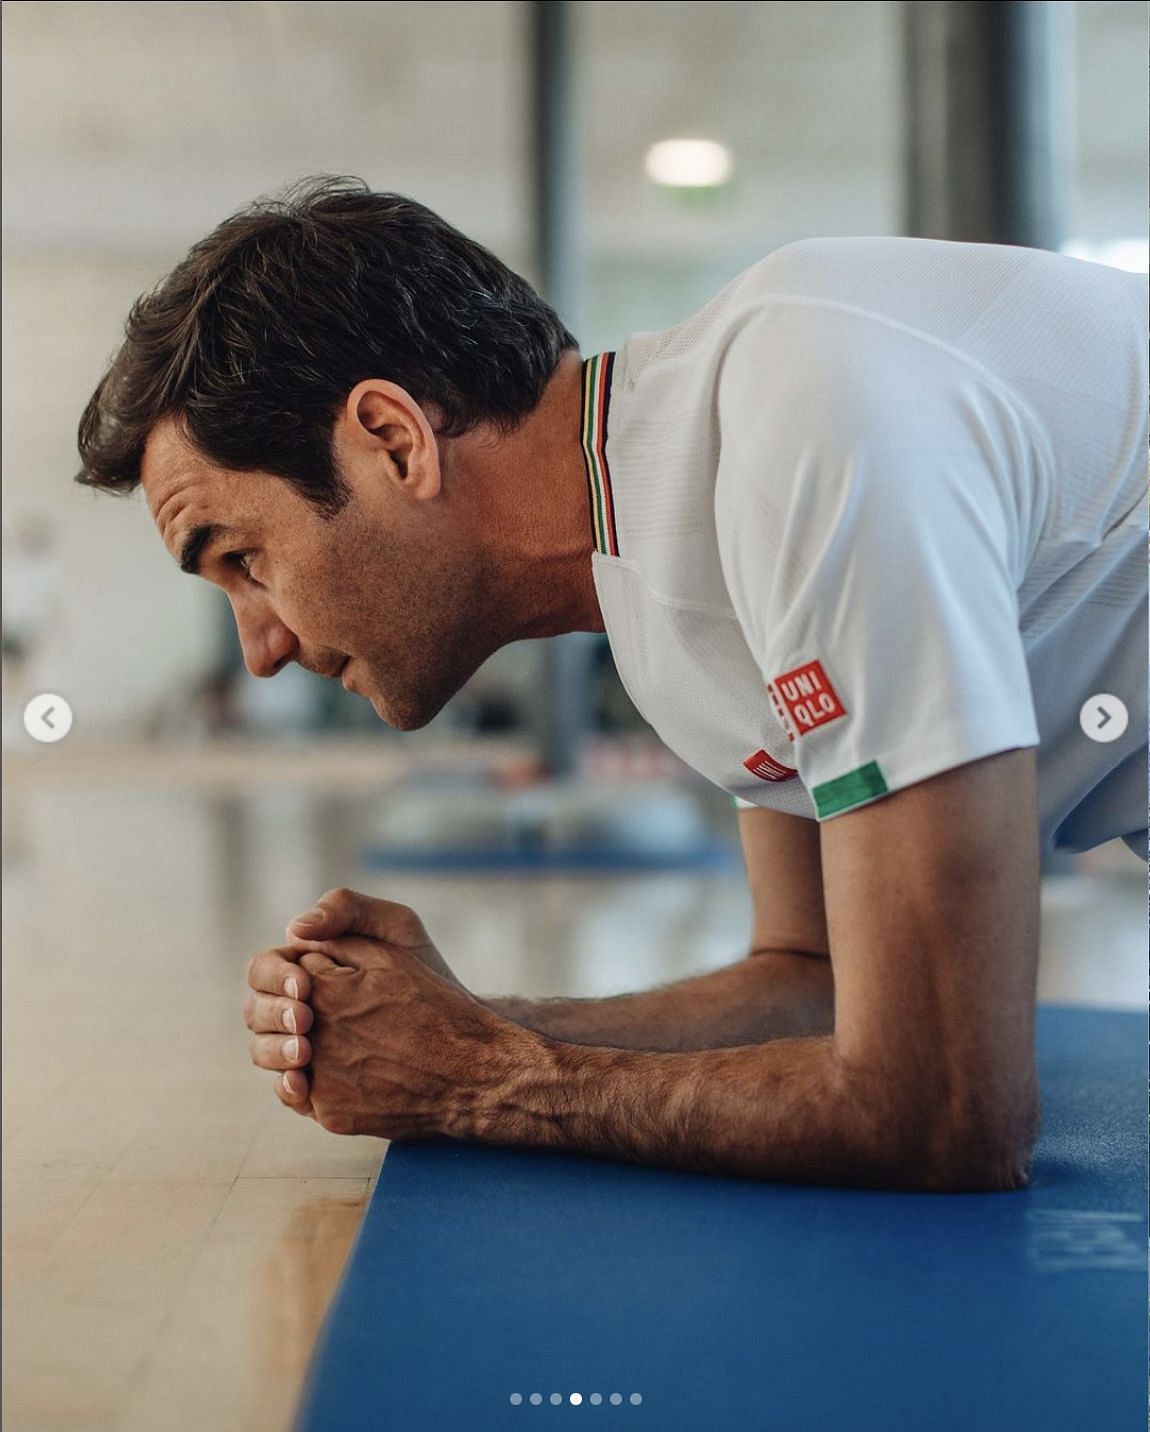 Federer likely doing planks at the gym.